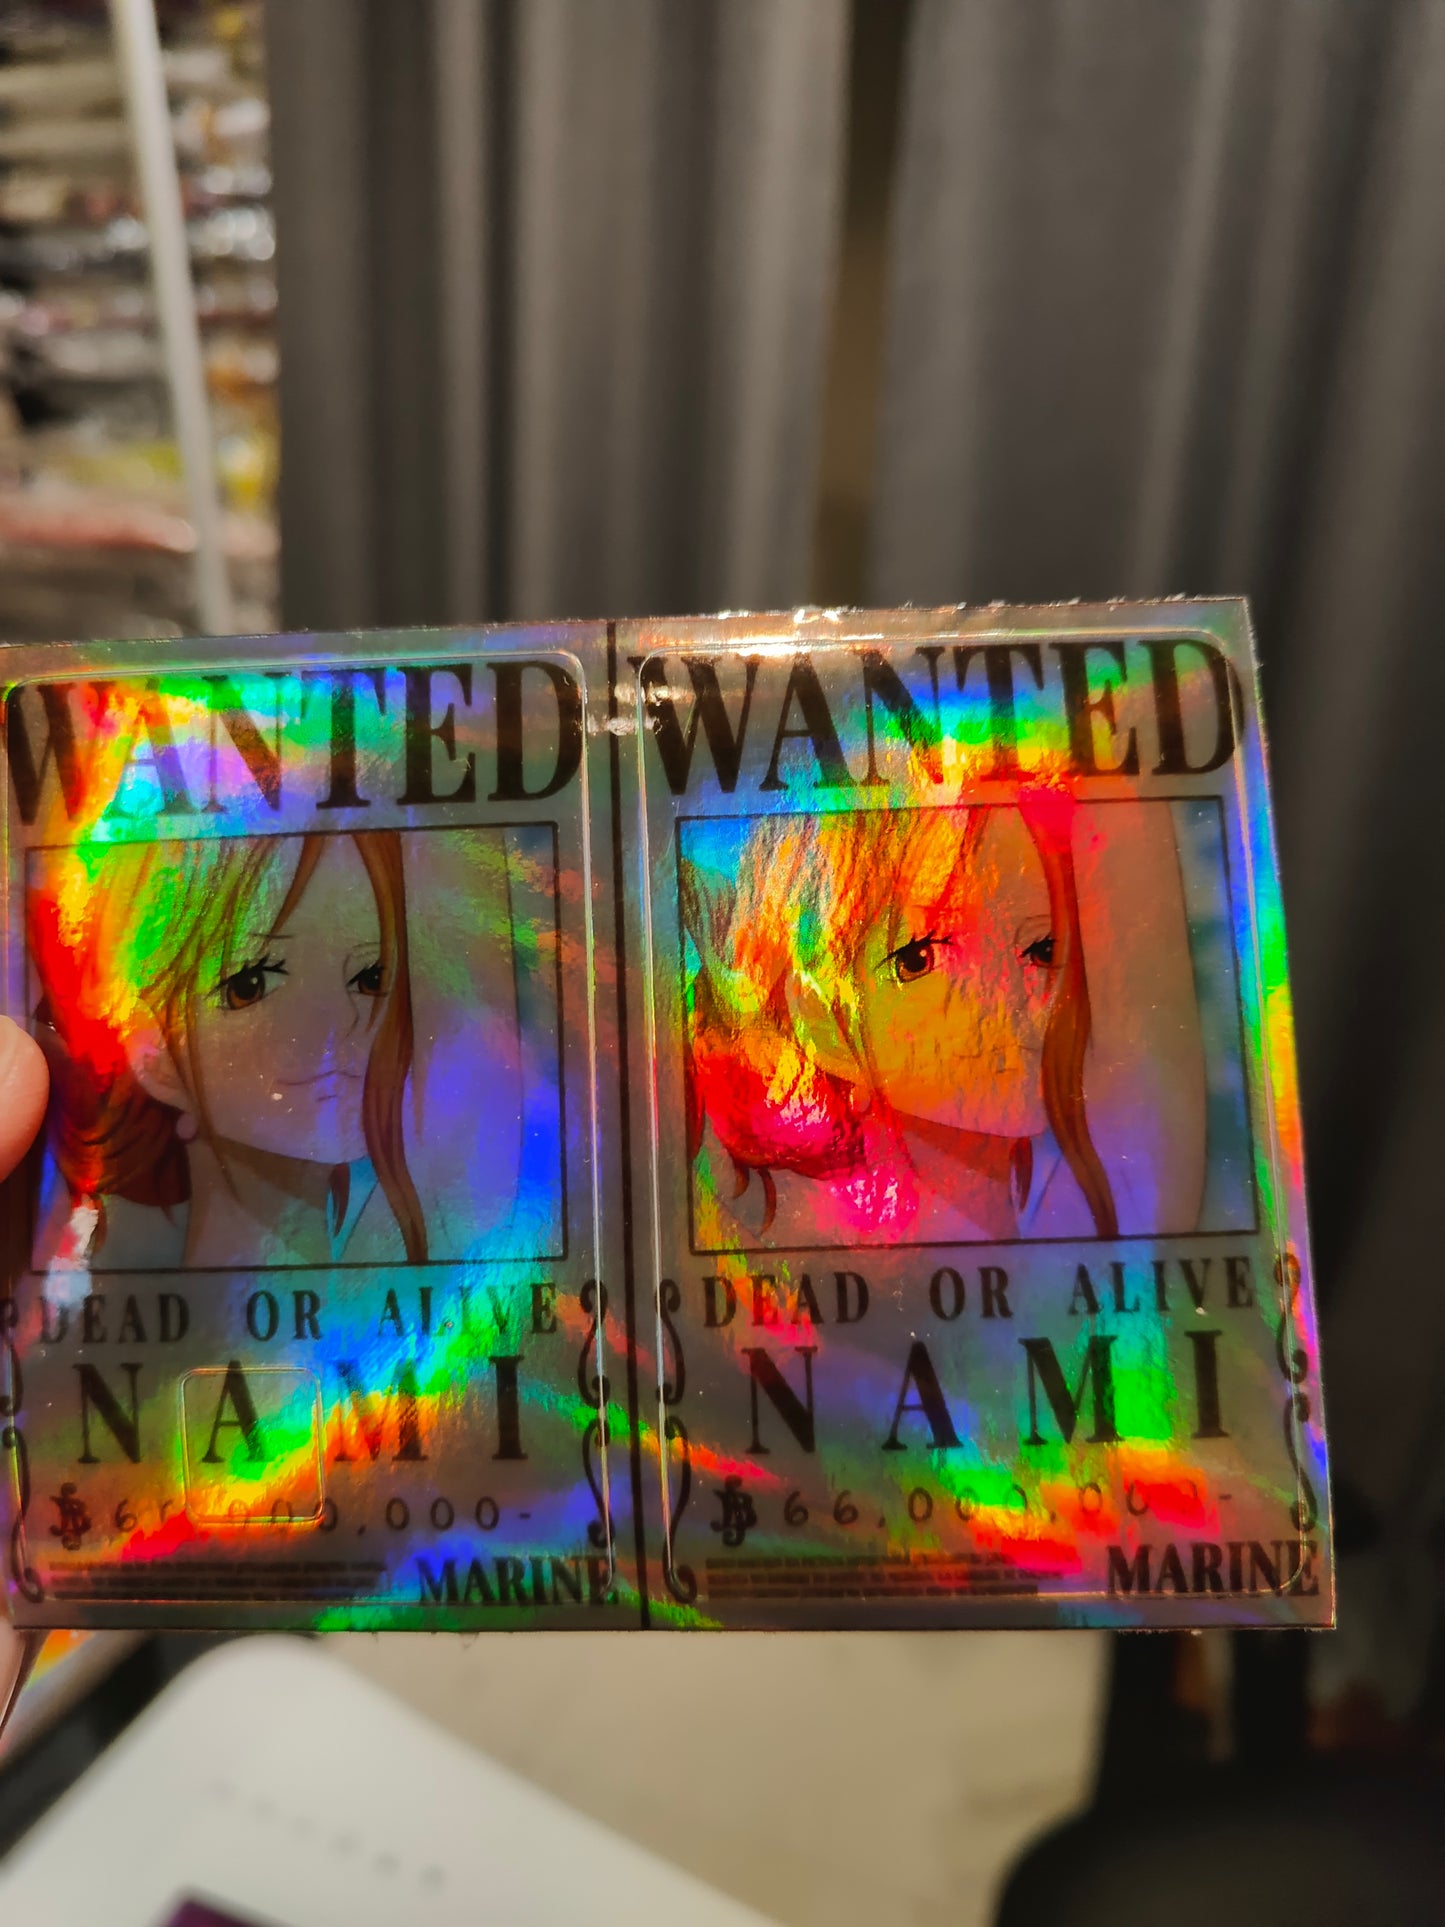 One Piece - Nami Wanted Poster Holographic Credit Card Sticker (Please Read Description)